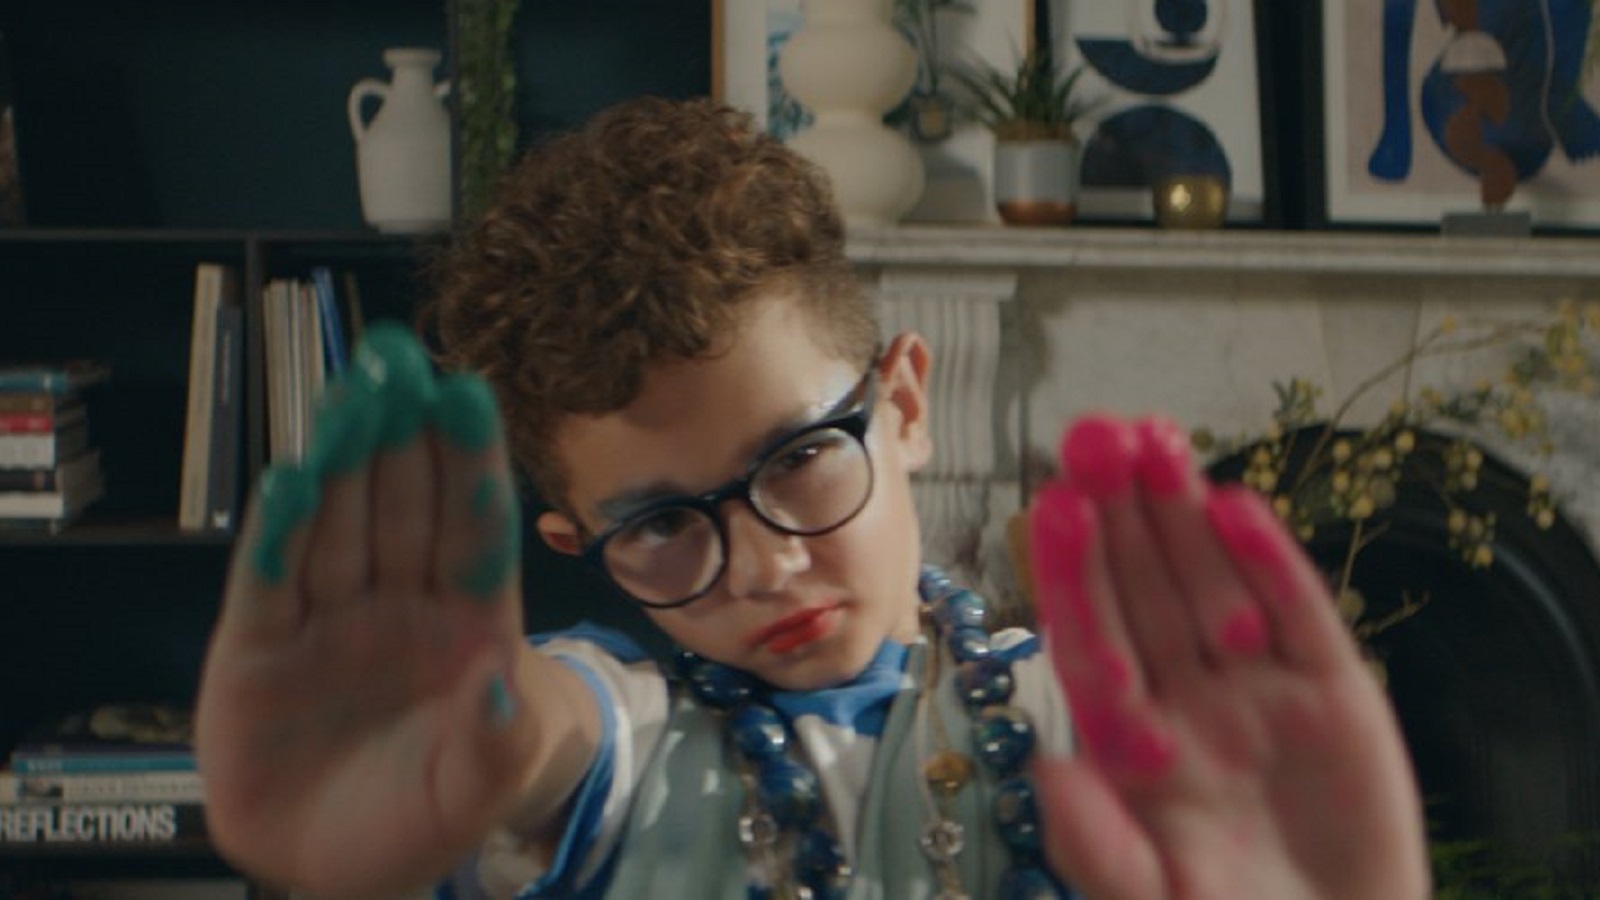 Social Media Users React to John Lewis Home Insurance’ Ad